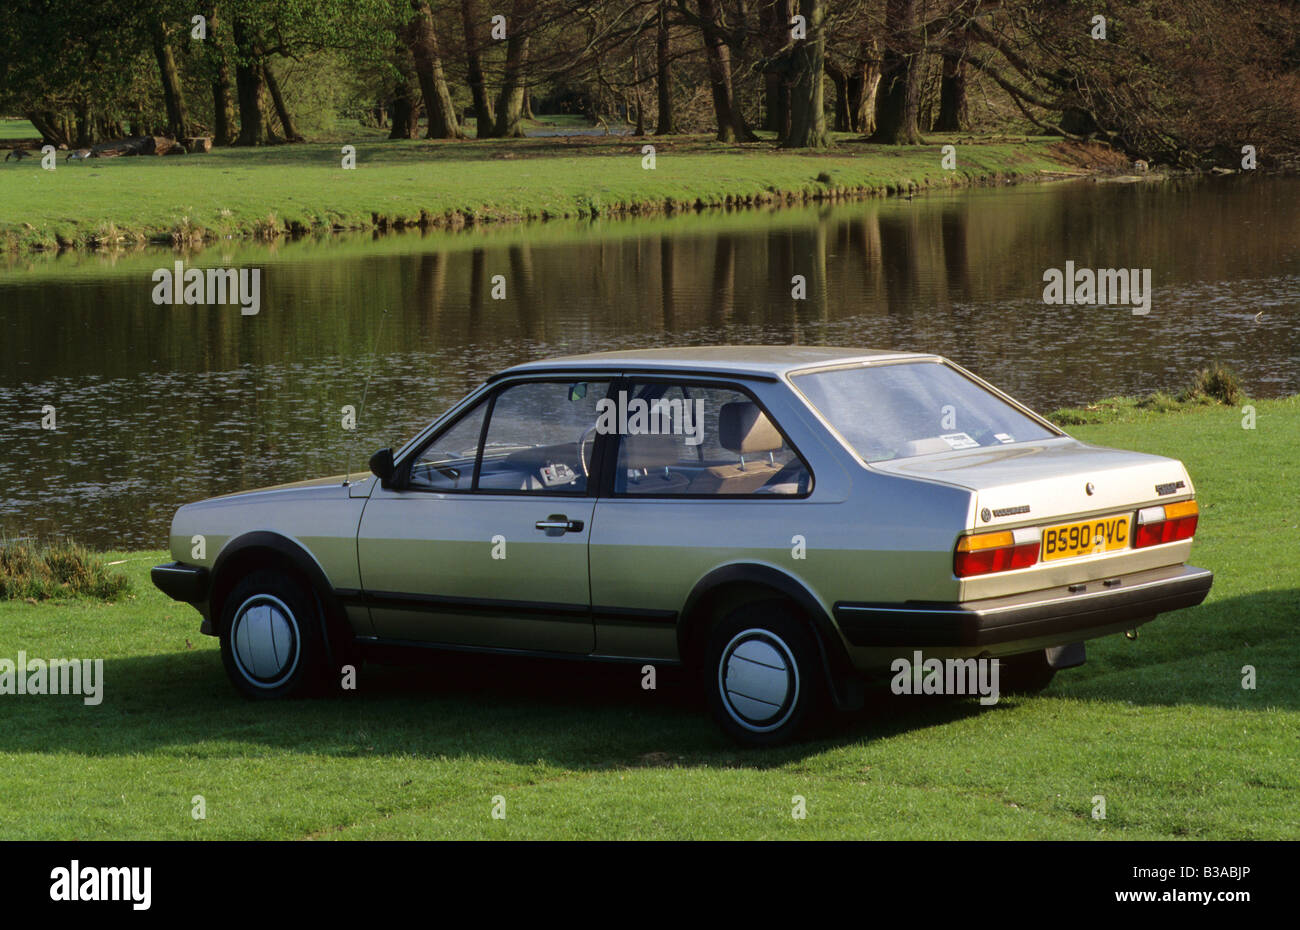 Volkswagen Polo classic GL Saloon of 1985 Stock Photo - Alamy